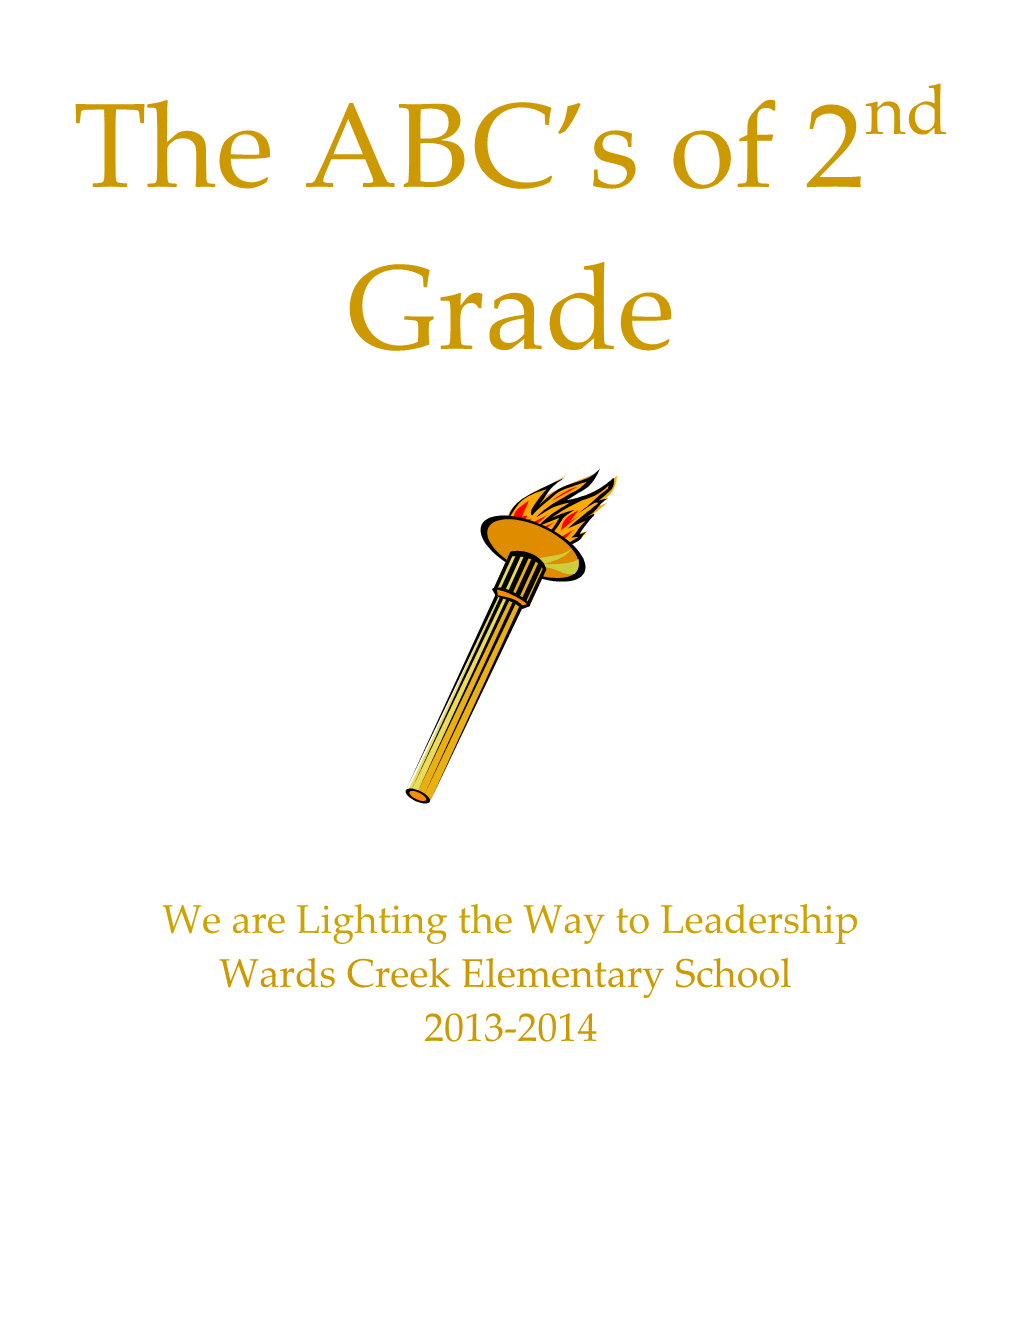 The ABC S of 2Nd Grade